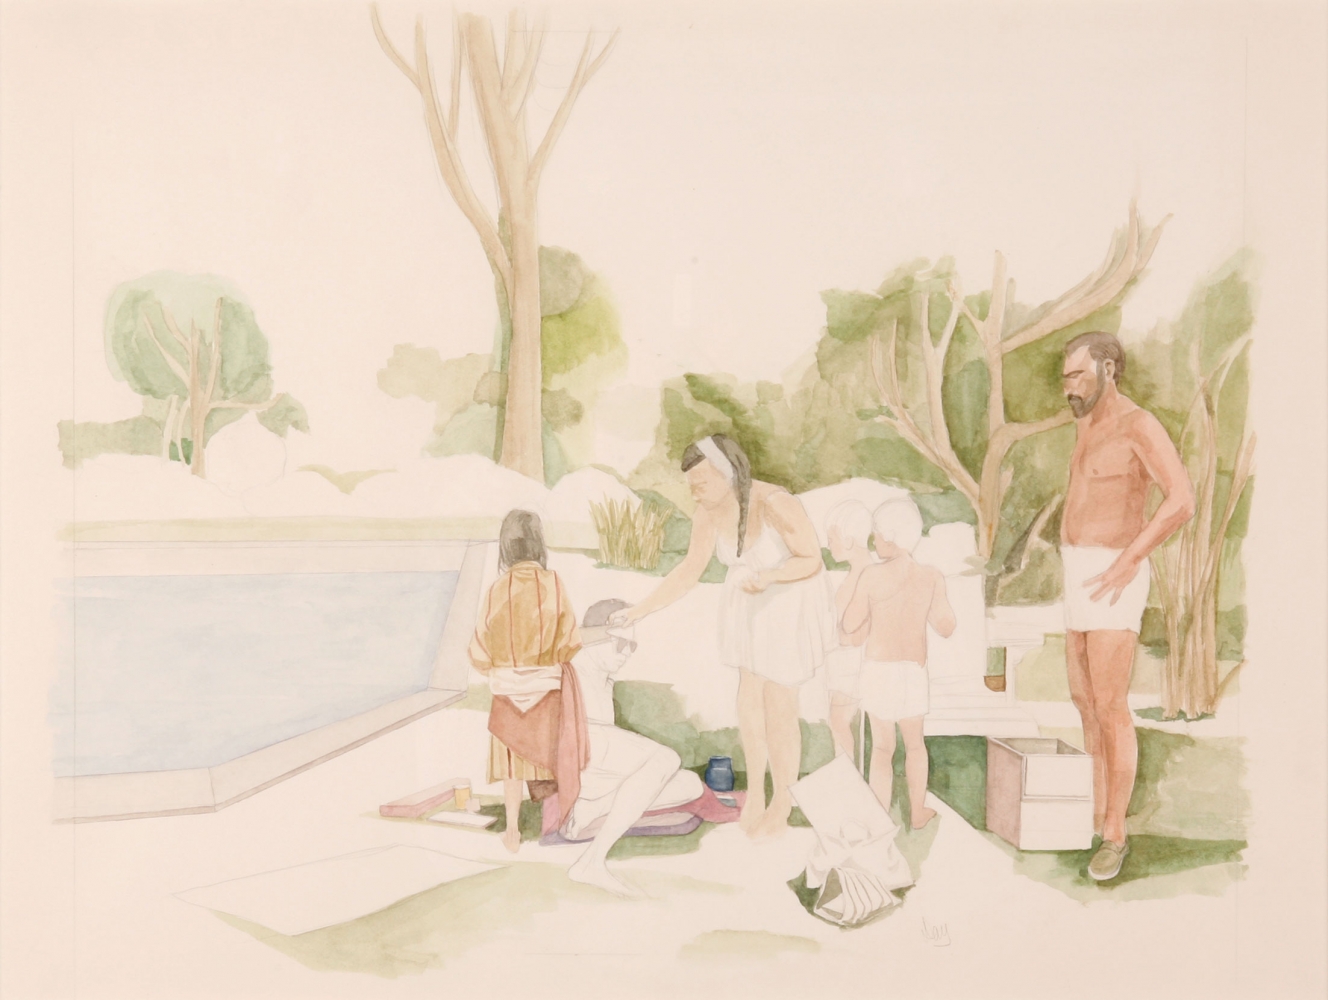 By The Pool I, c. 1968  14.88" x 19.75"  Watercolor And Graphite On Paper